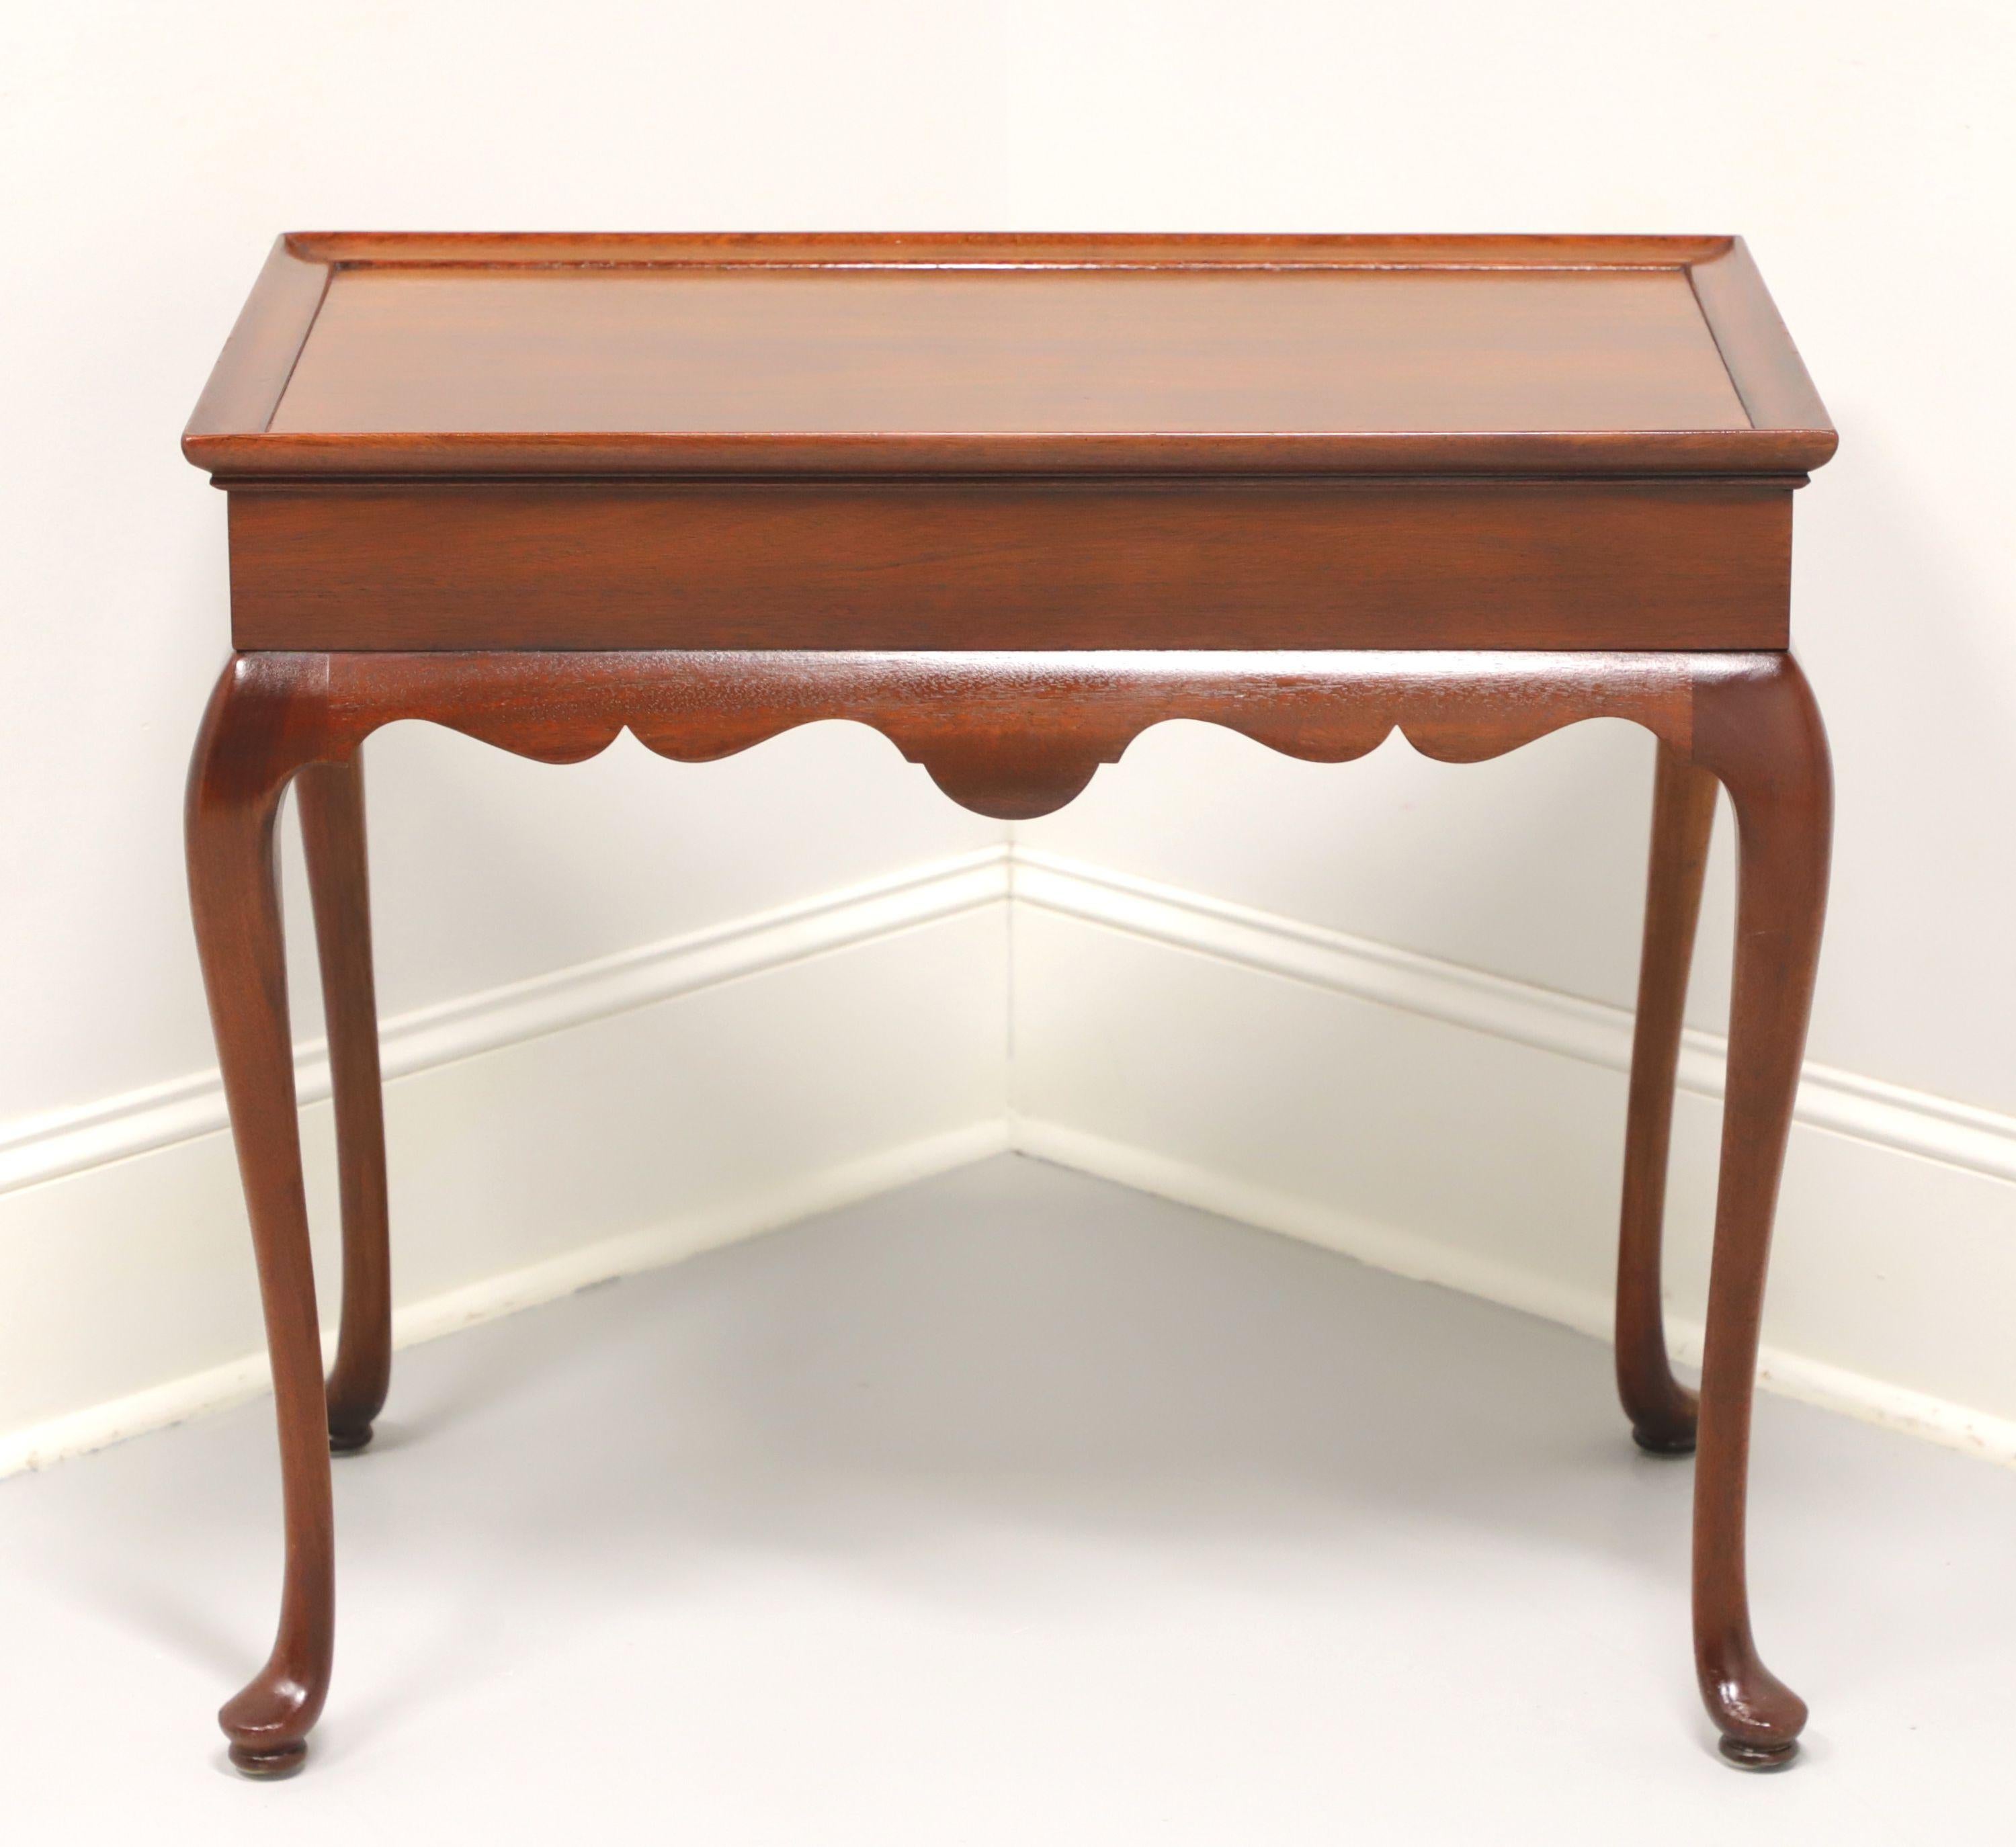 A tea table in the Queen Anne style by Hickory Furniture Company. Solid mahogany, two side slide out trays with brass knobs, carved apron, tapered legs and pad feet. Made in North Carolina, USA, in the late 20th century.

Style #: 760-76

Measures: